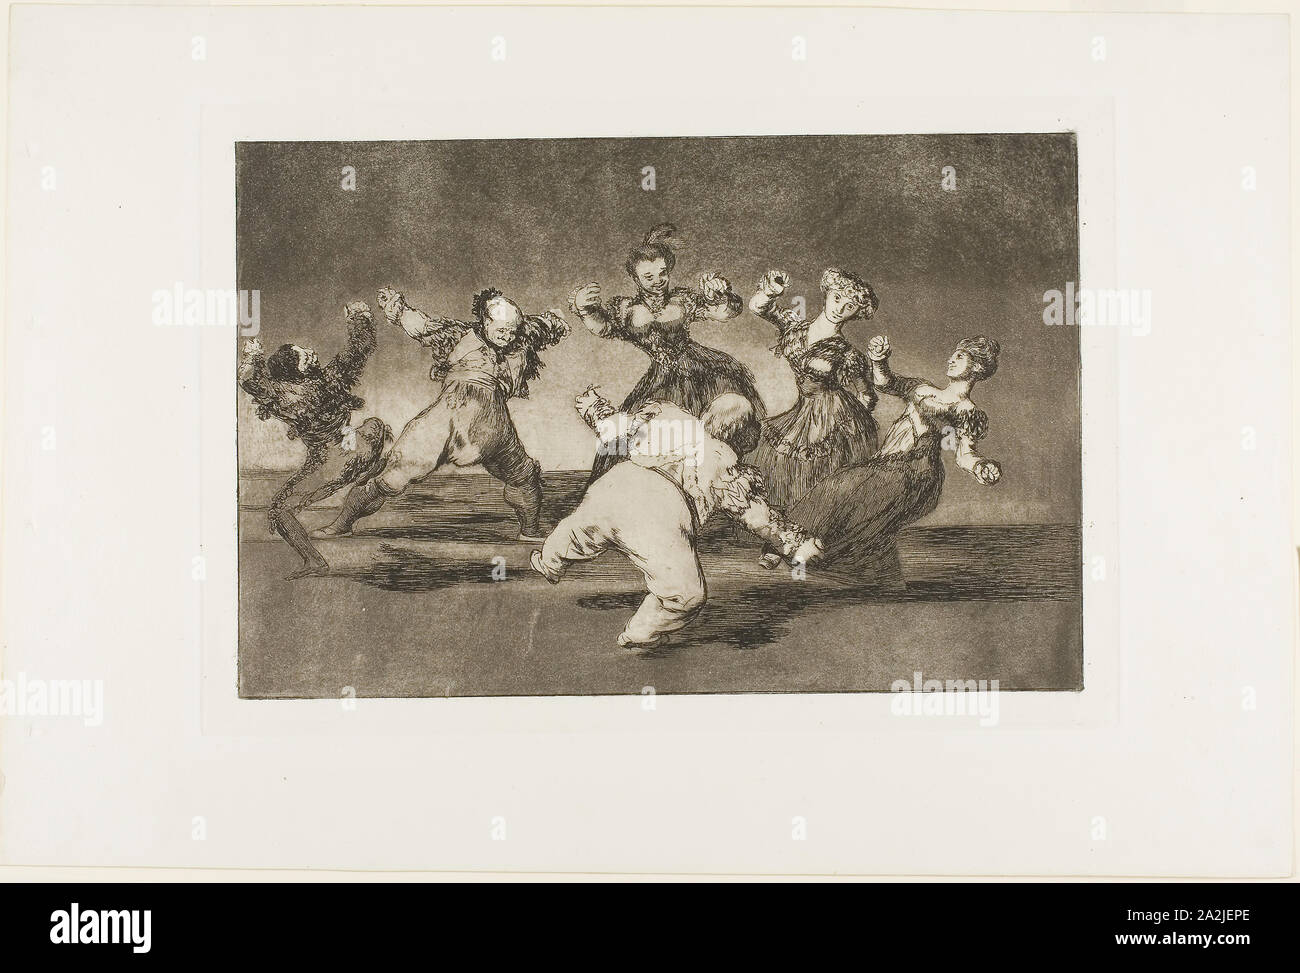 Merry Folly, from Disparates, published as plate 12 in Los Proverbios, 1816–19, published 1864, Francisco José de Goya y Lucientes, Spanish, 1746-1828, Spain, Etching, burnished aquatint, and drypoint in brown-black on ivory wove paper, 214 x 324 mm (image), 244 x 353 mm (plate), 331 x 497 mm (sheet Stock Photo